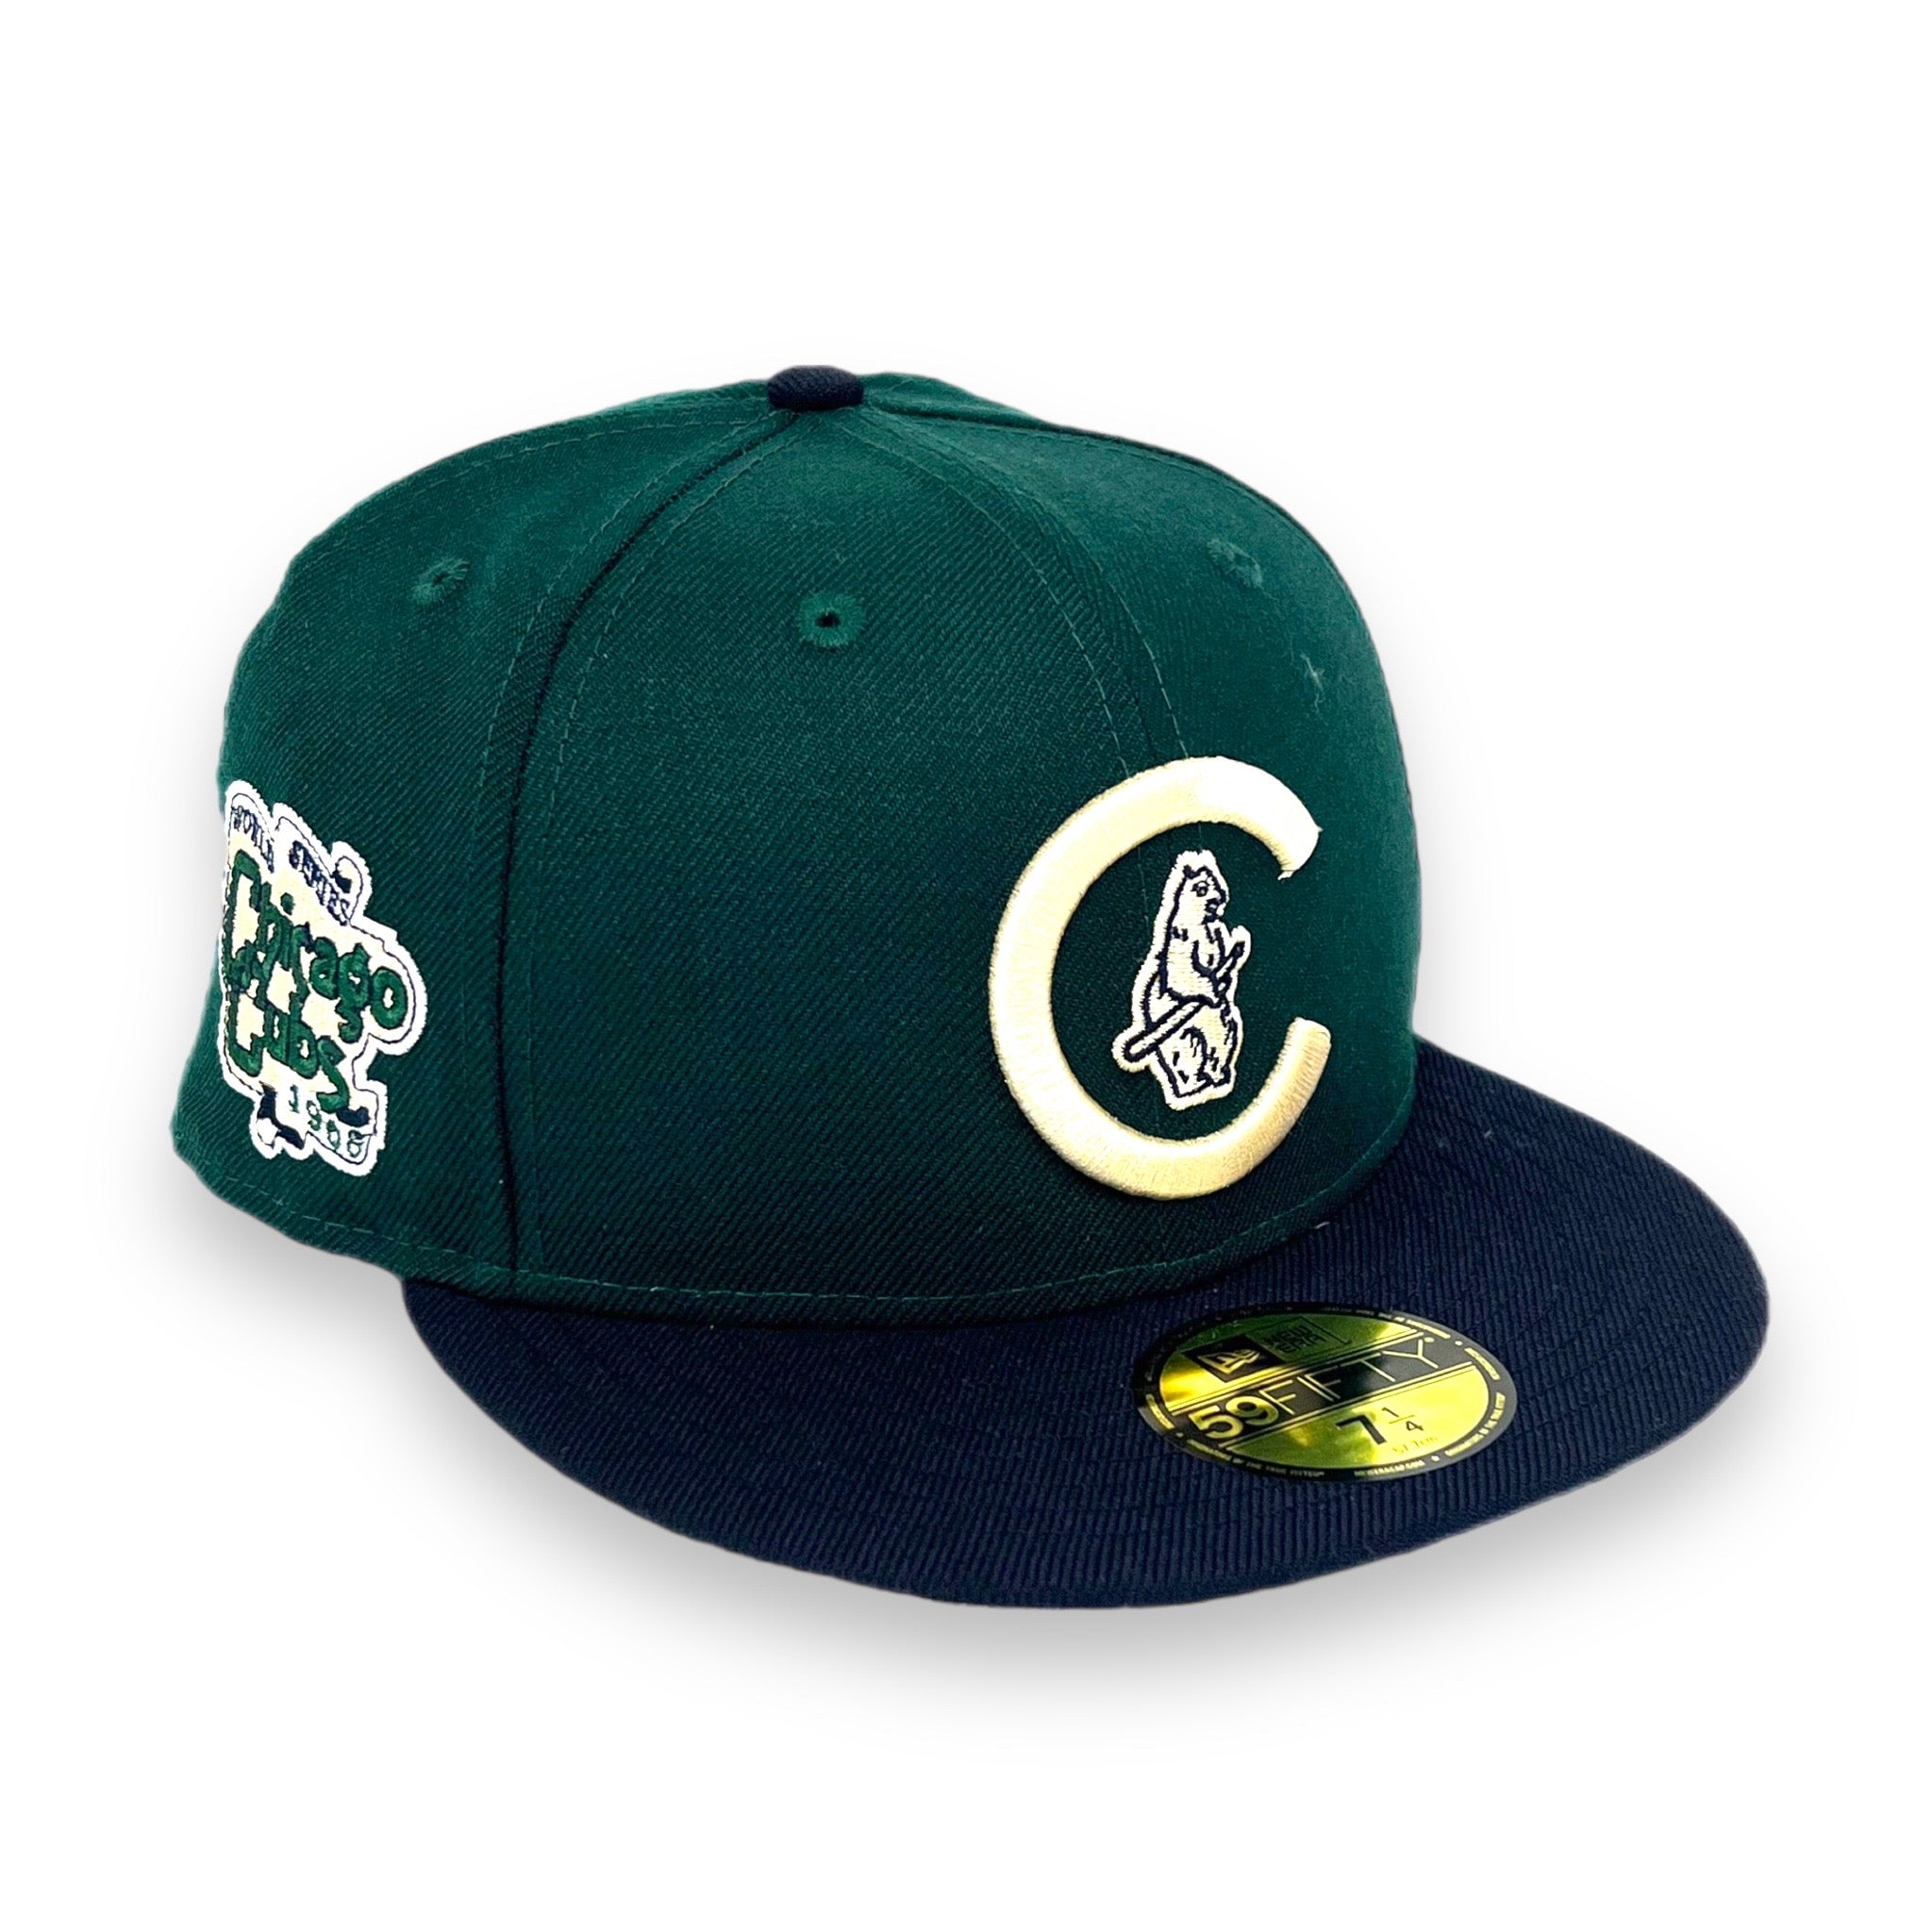 CHICAGO CUBS (DARK GREEN) (1908 WORLD SERIES) NEW ERA 59FIFTY FITTED